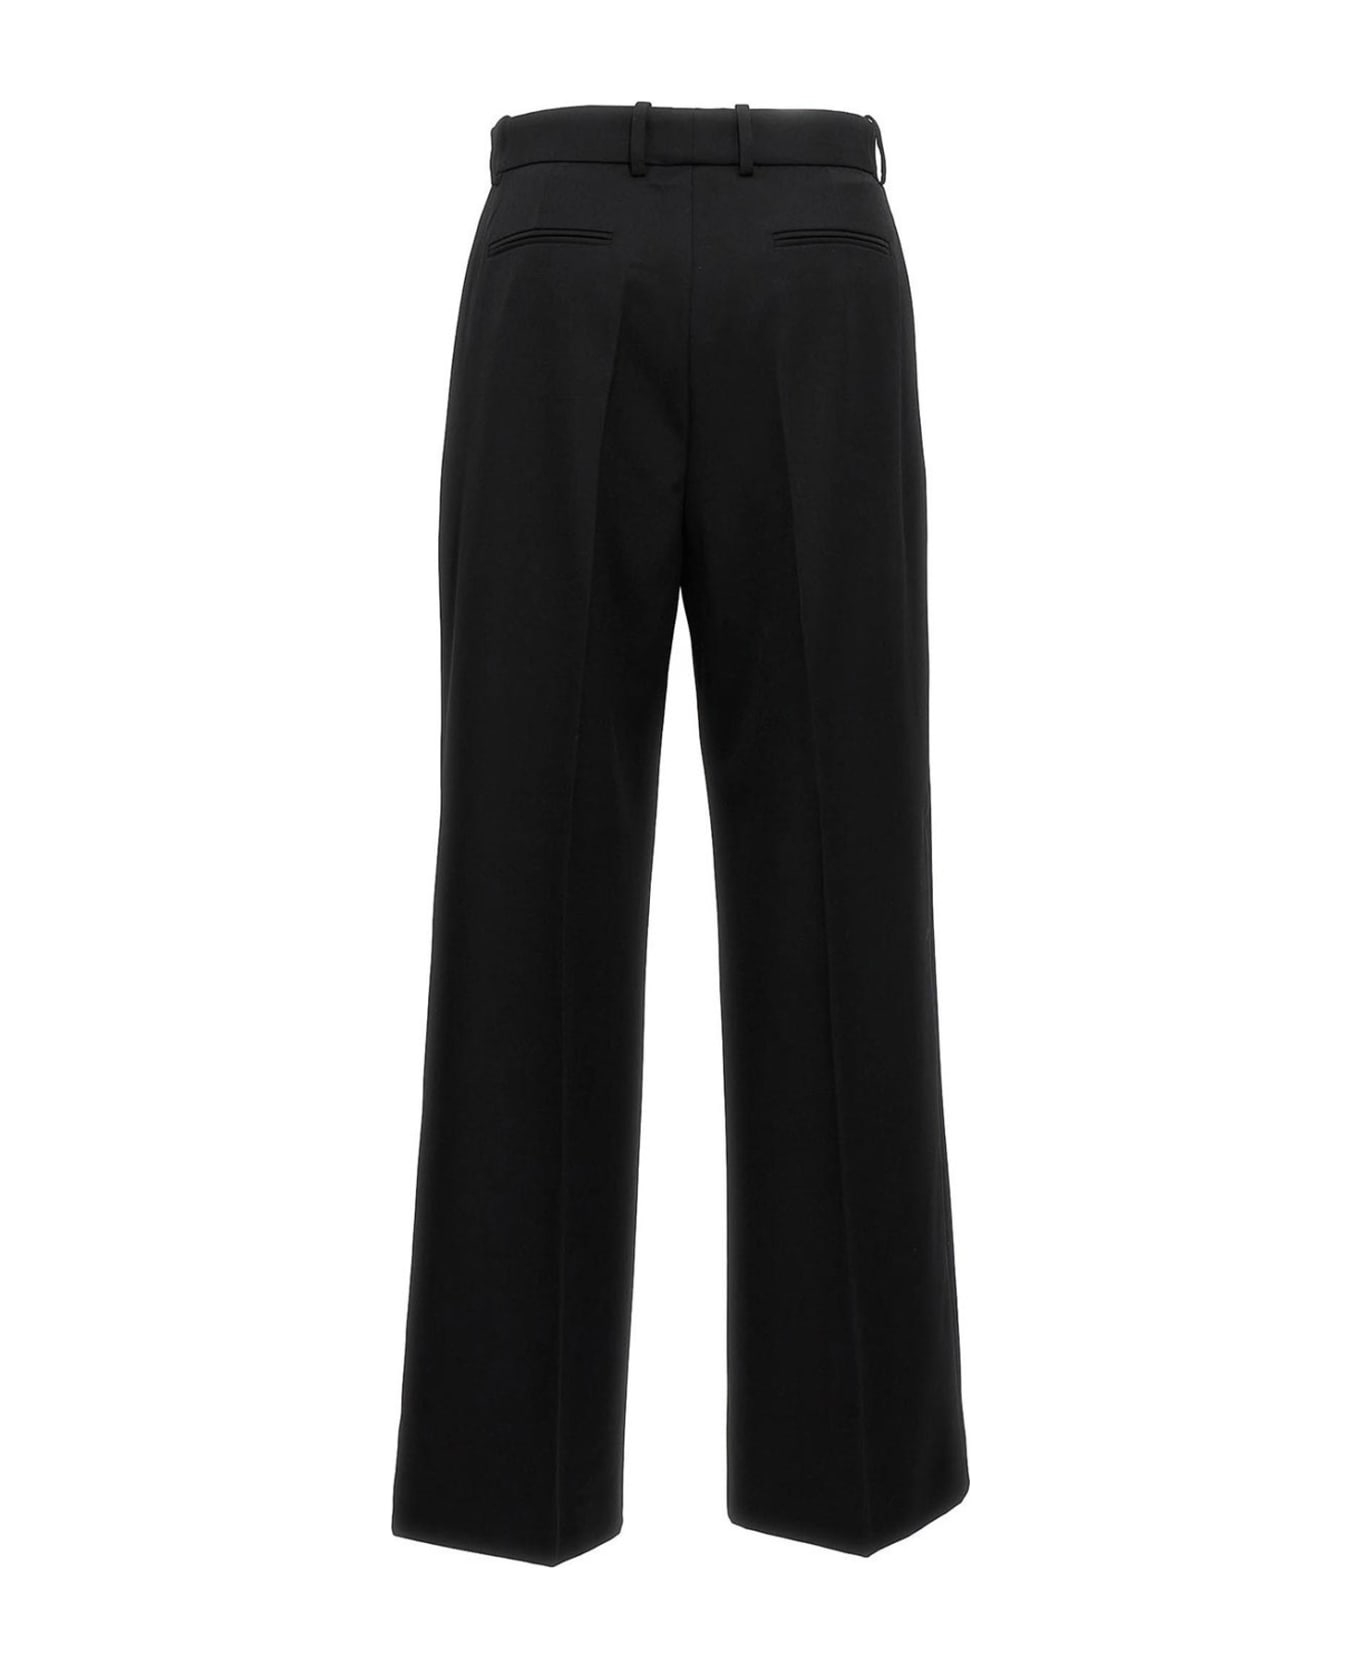 Lanvin High-waisted Wool Trousers - BLACK ボトムス